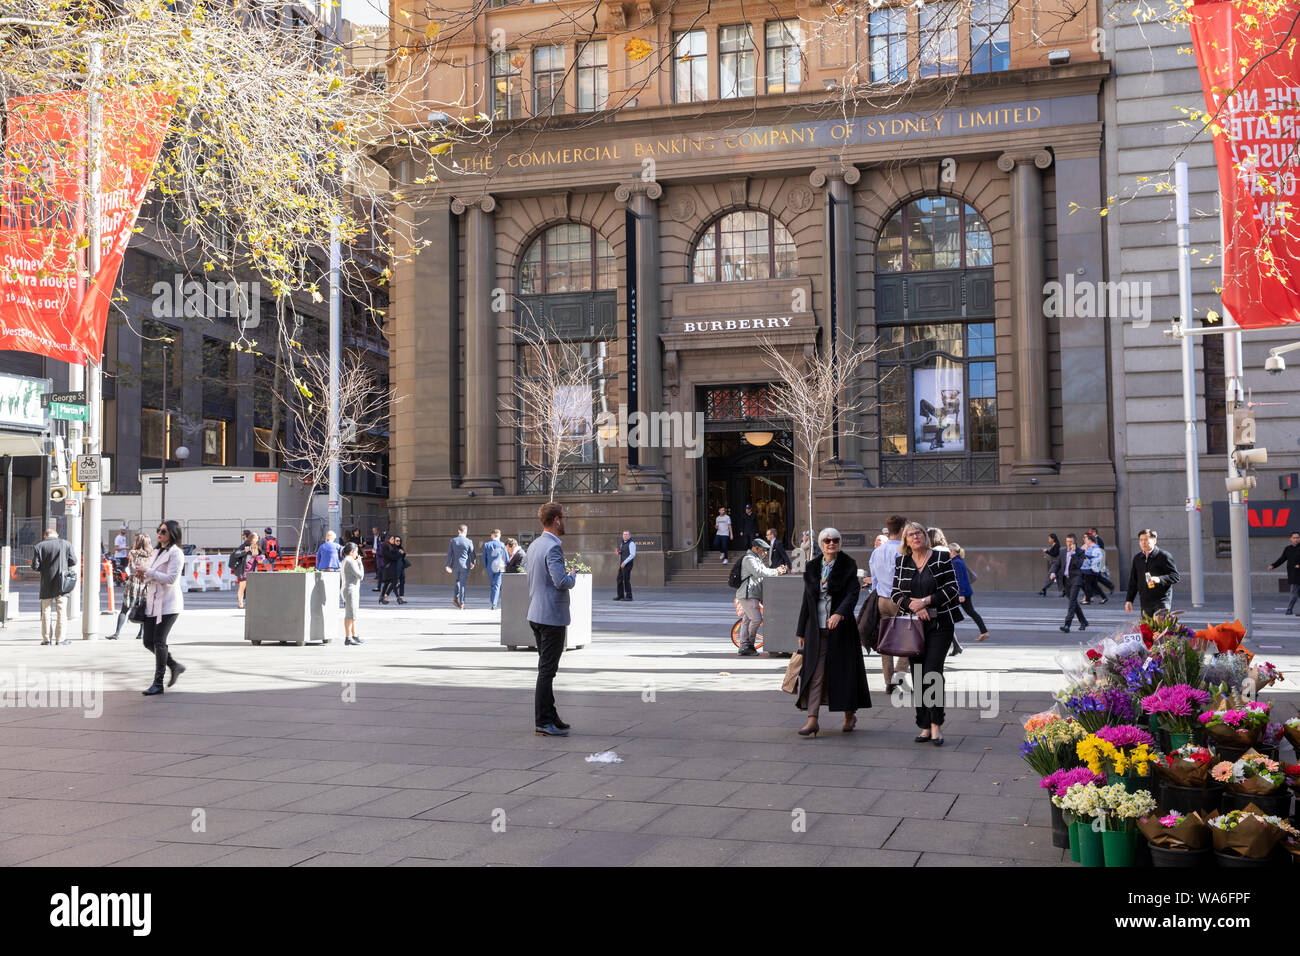 Burberry store and Martin place florist in Sydney city centre,New South  Wales,Australia Stock Photo - Alamy